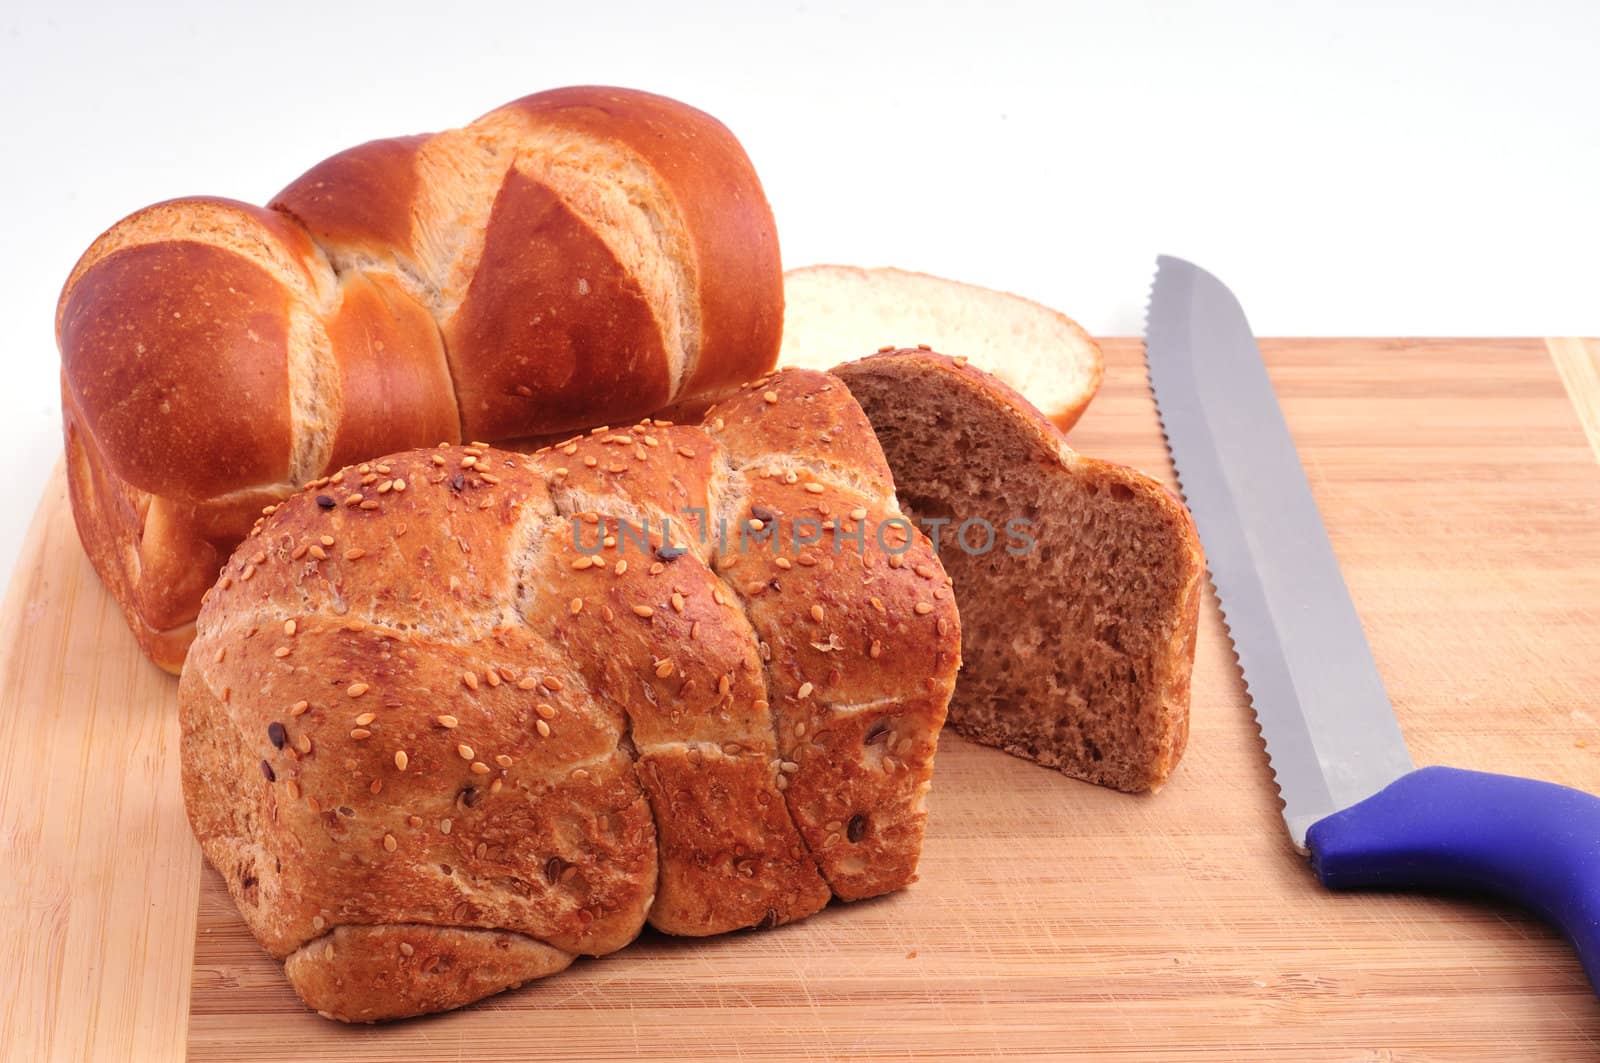 Two rolls of white and dark bread lay on a wooden board beside the knife